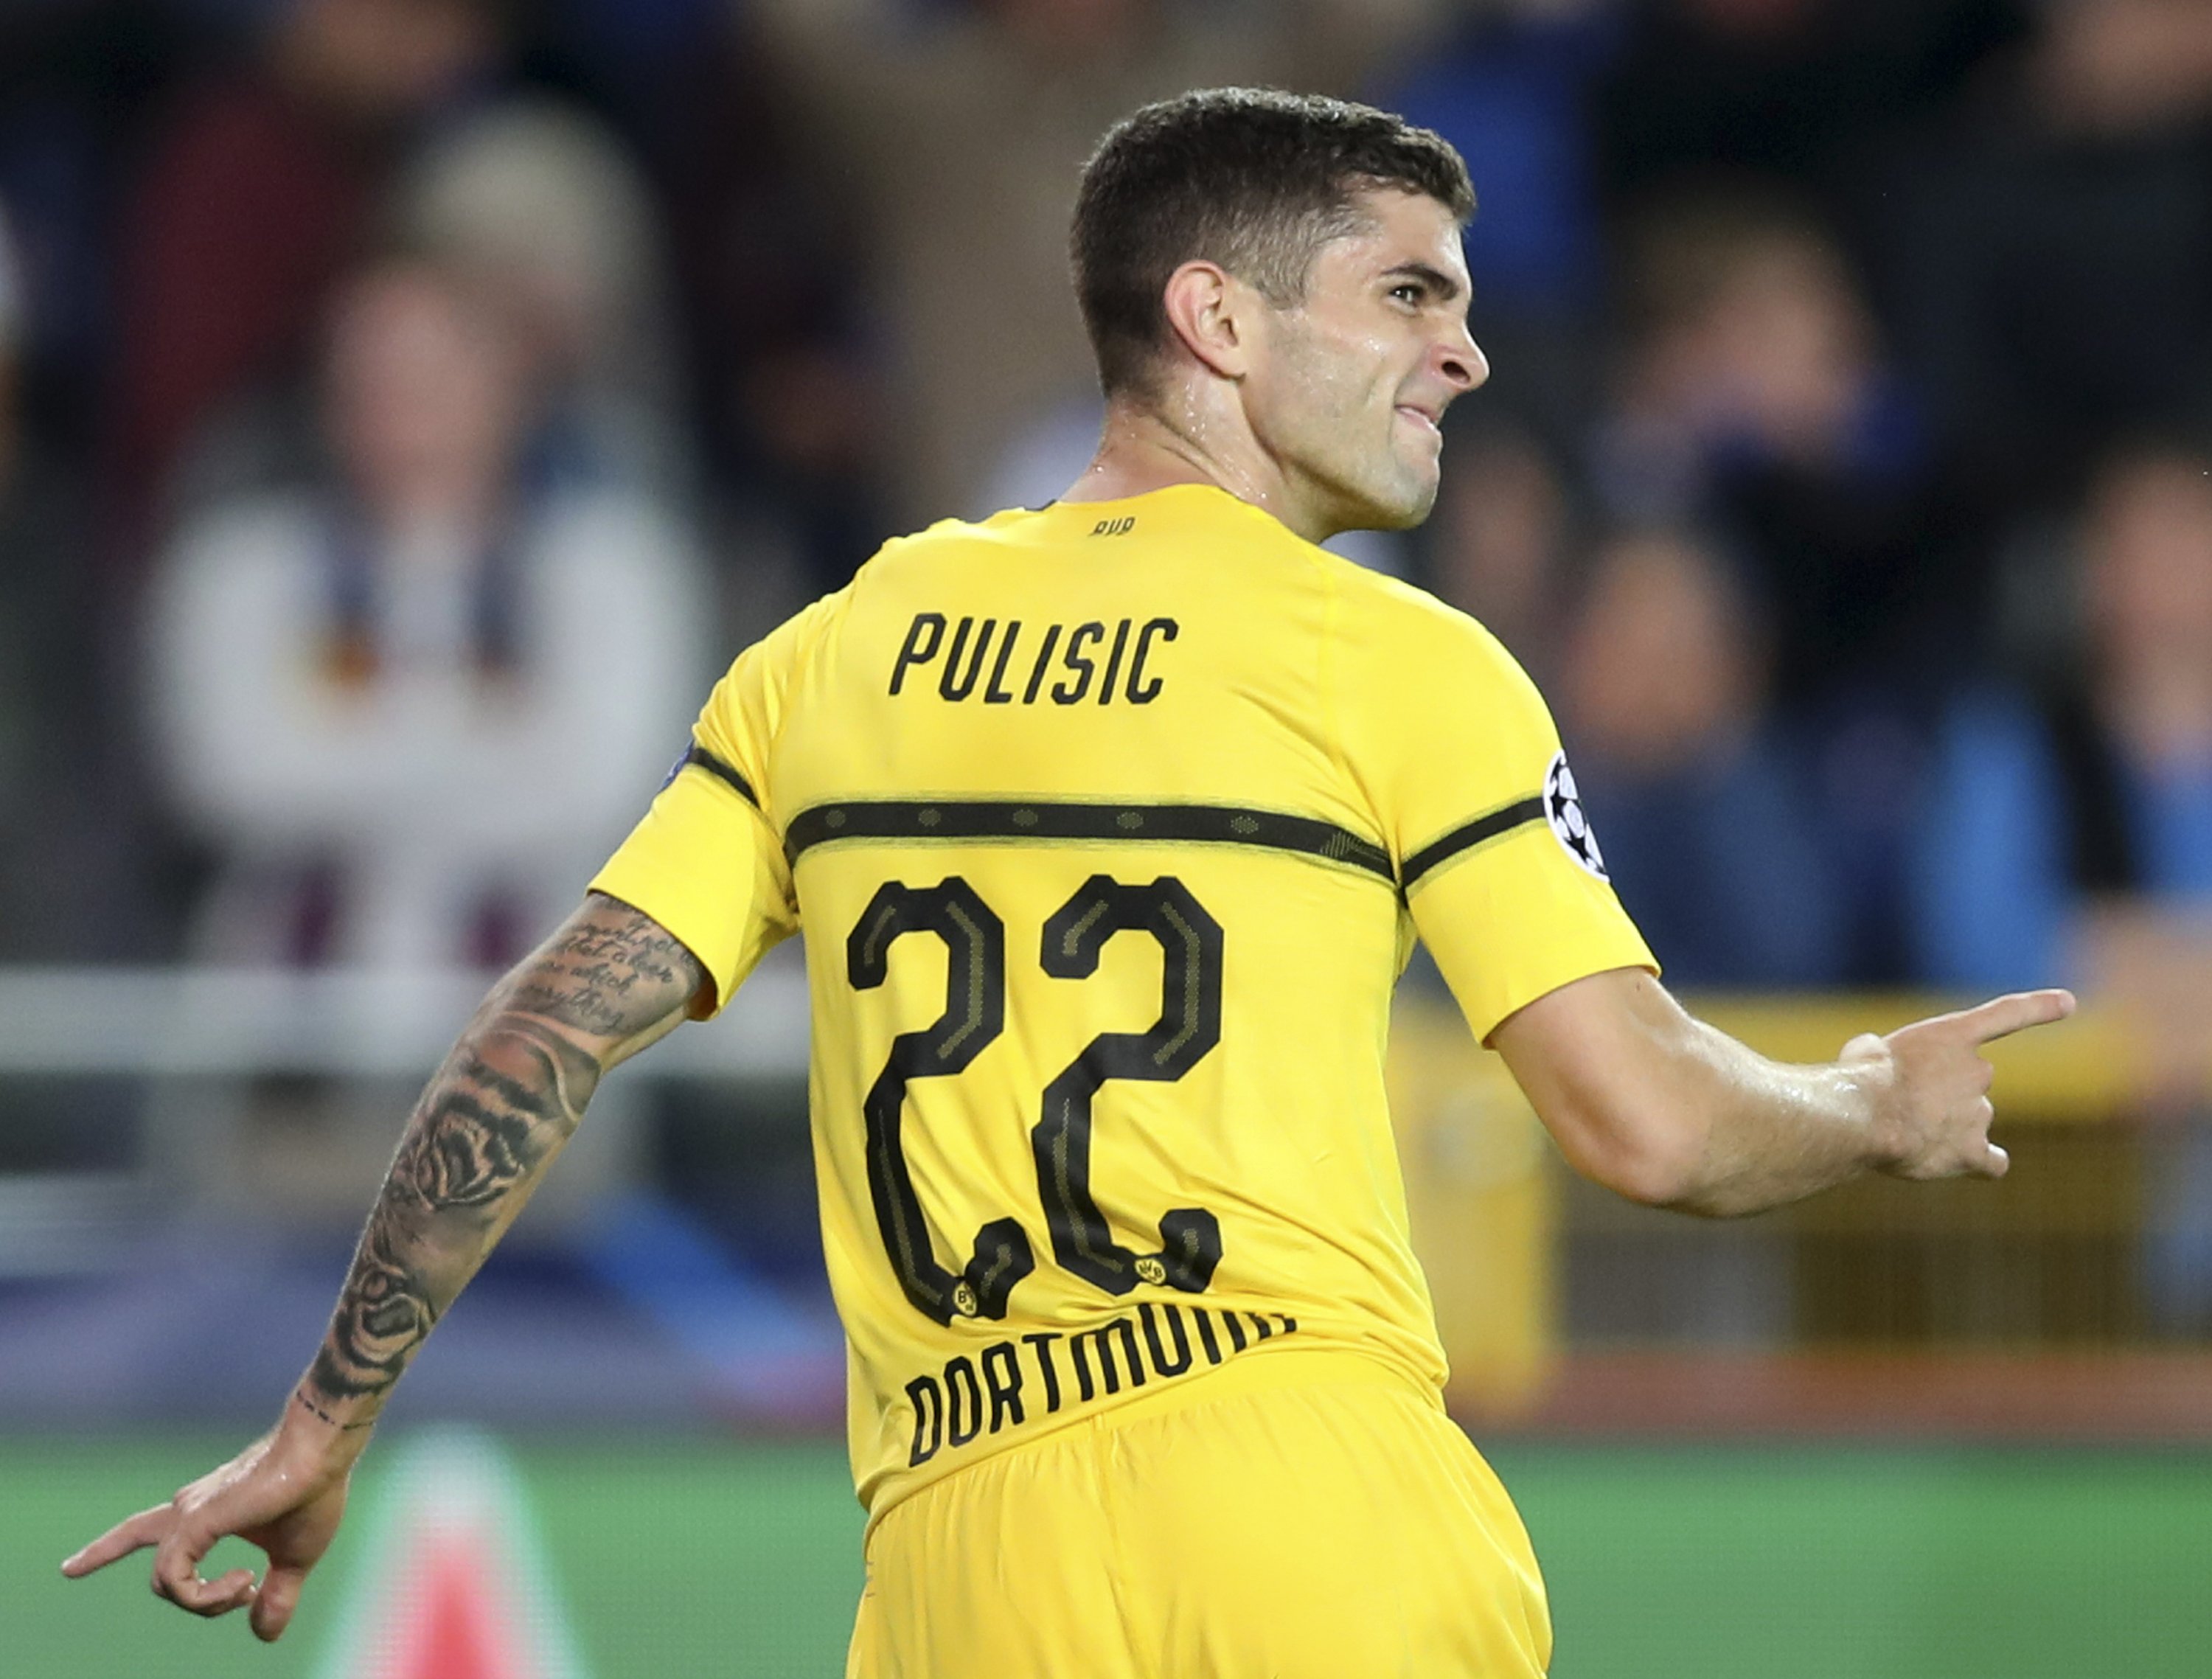 Pulisic Young Chelsea / Christian Pulisic Signs With Chelsea Becoming